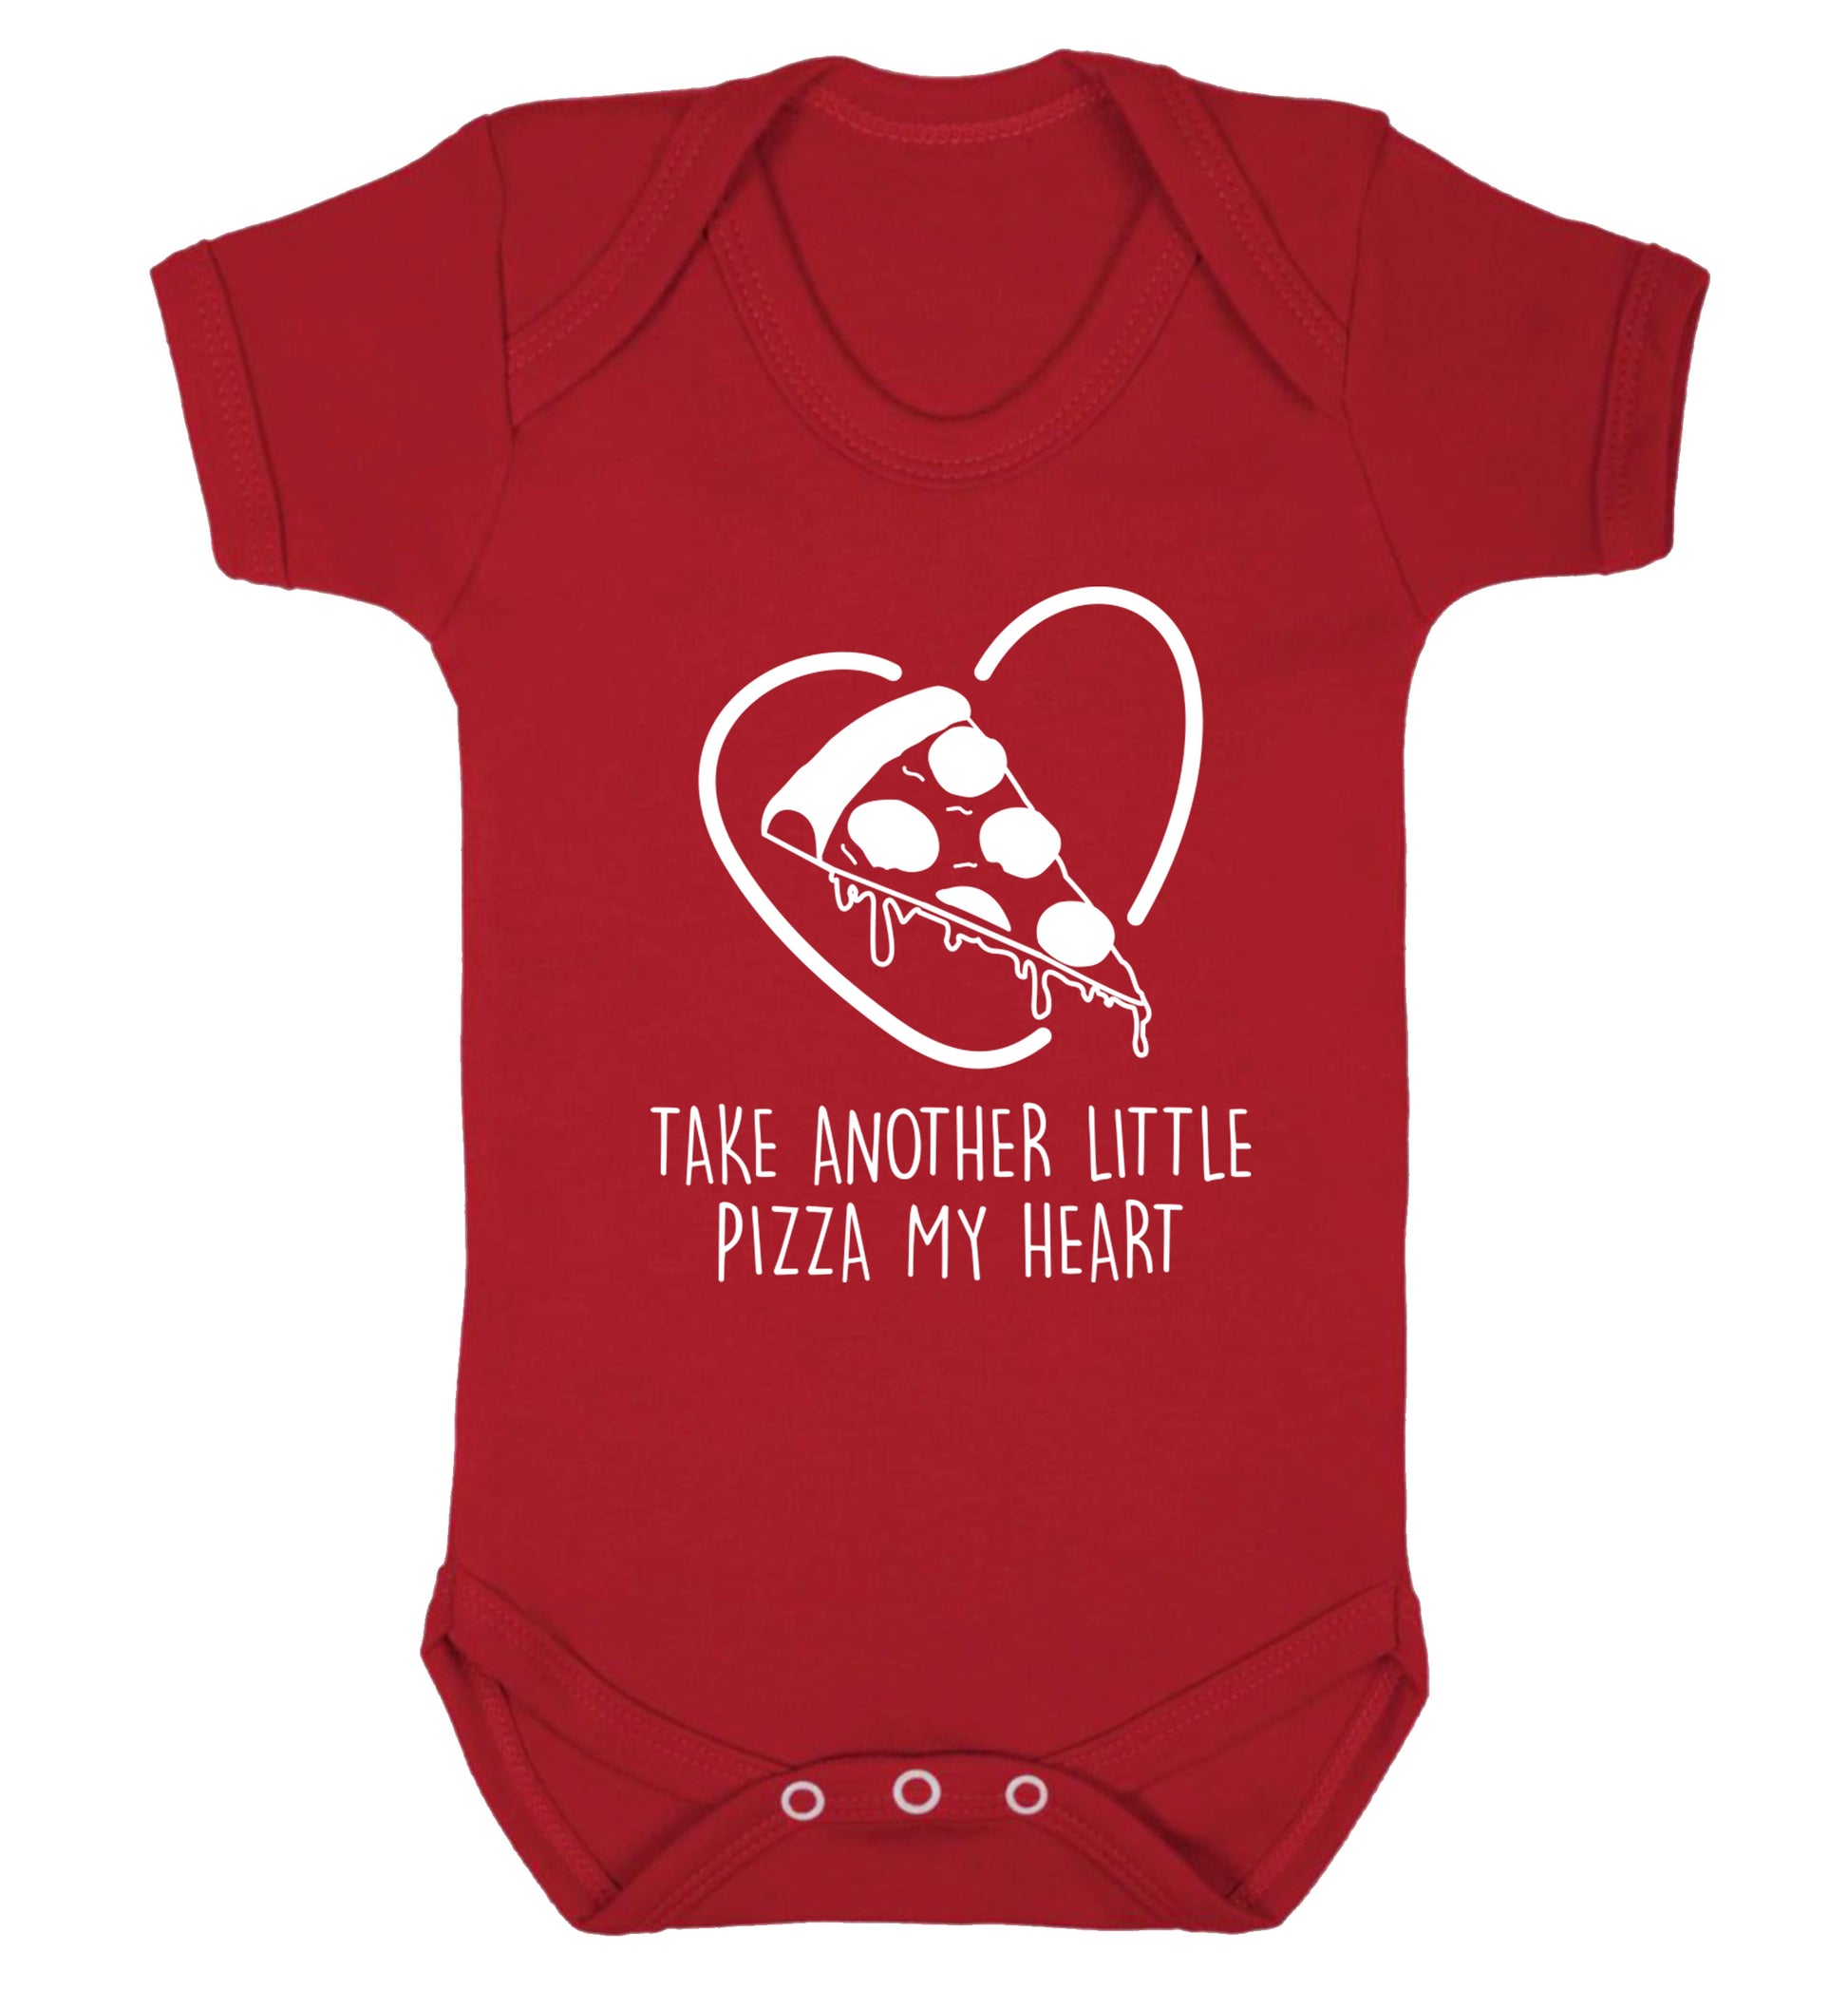 Take another little pizza my heart Baby Vest red 18-24 months